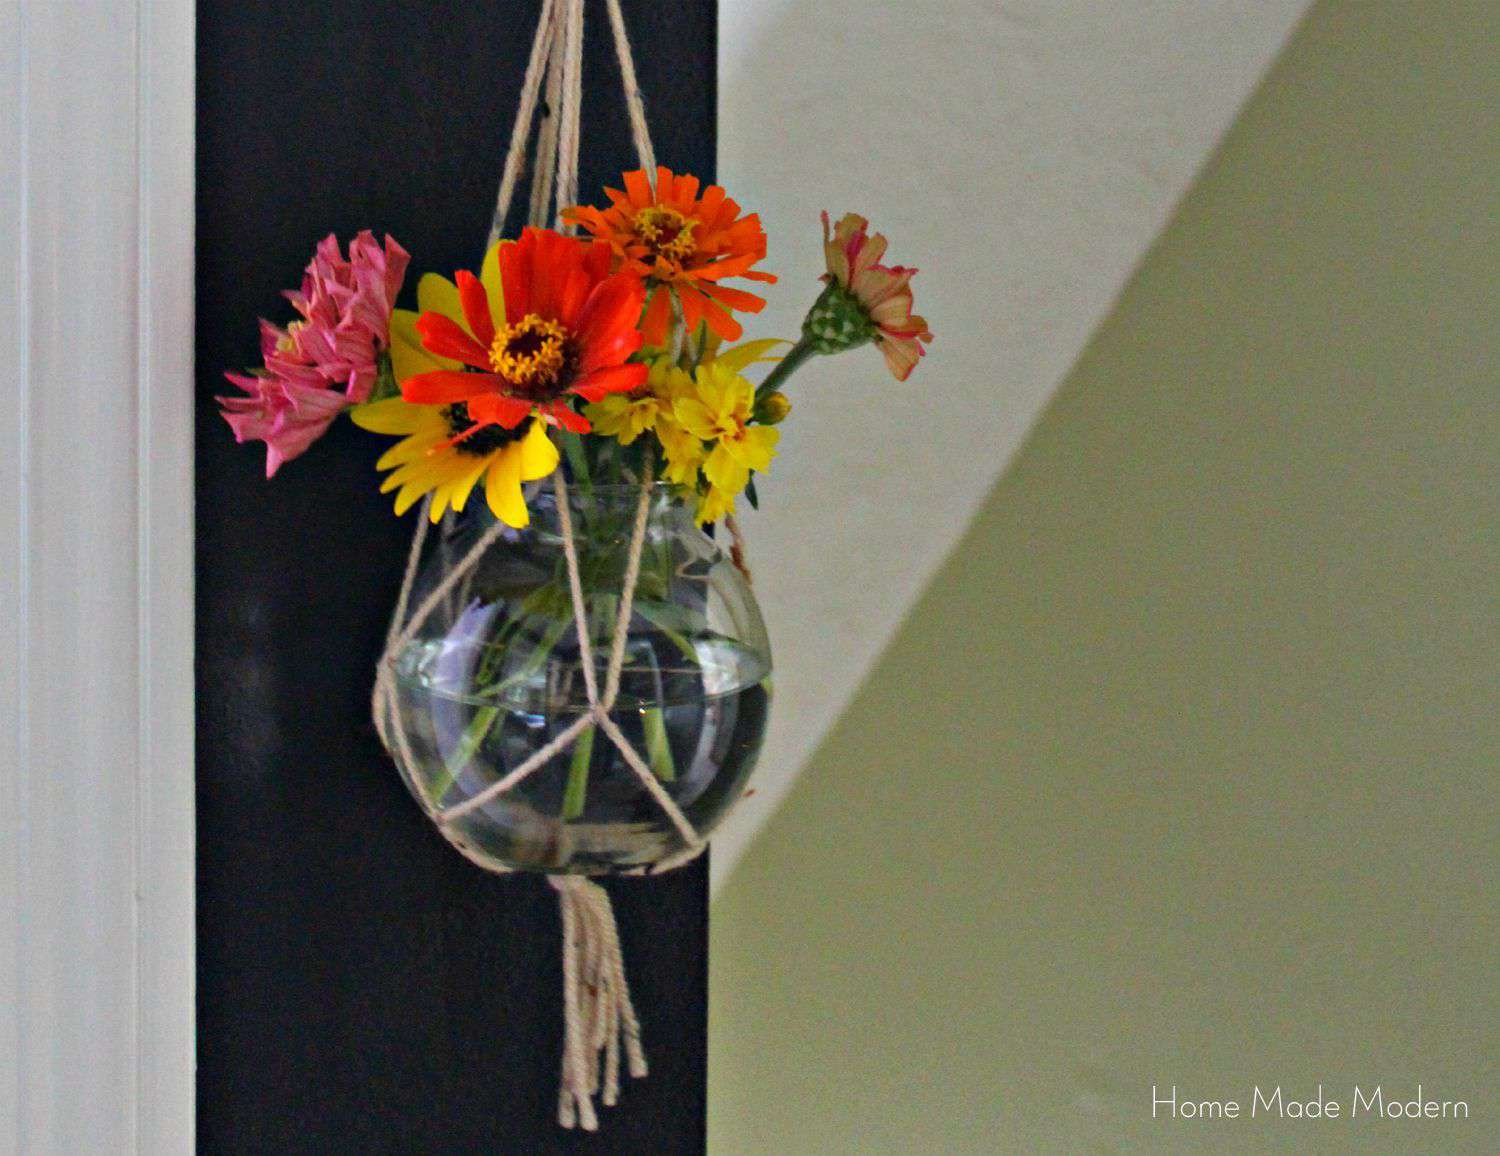 hanging glass ball vase of diy macrame hanging plant holder within macrame wall vase 3 56a492045f9b58b7d0d7985d